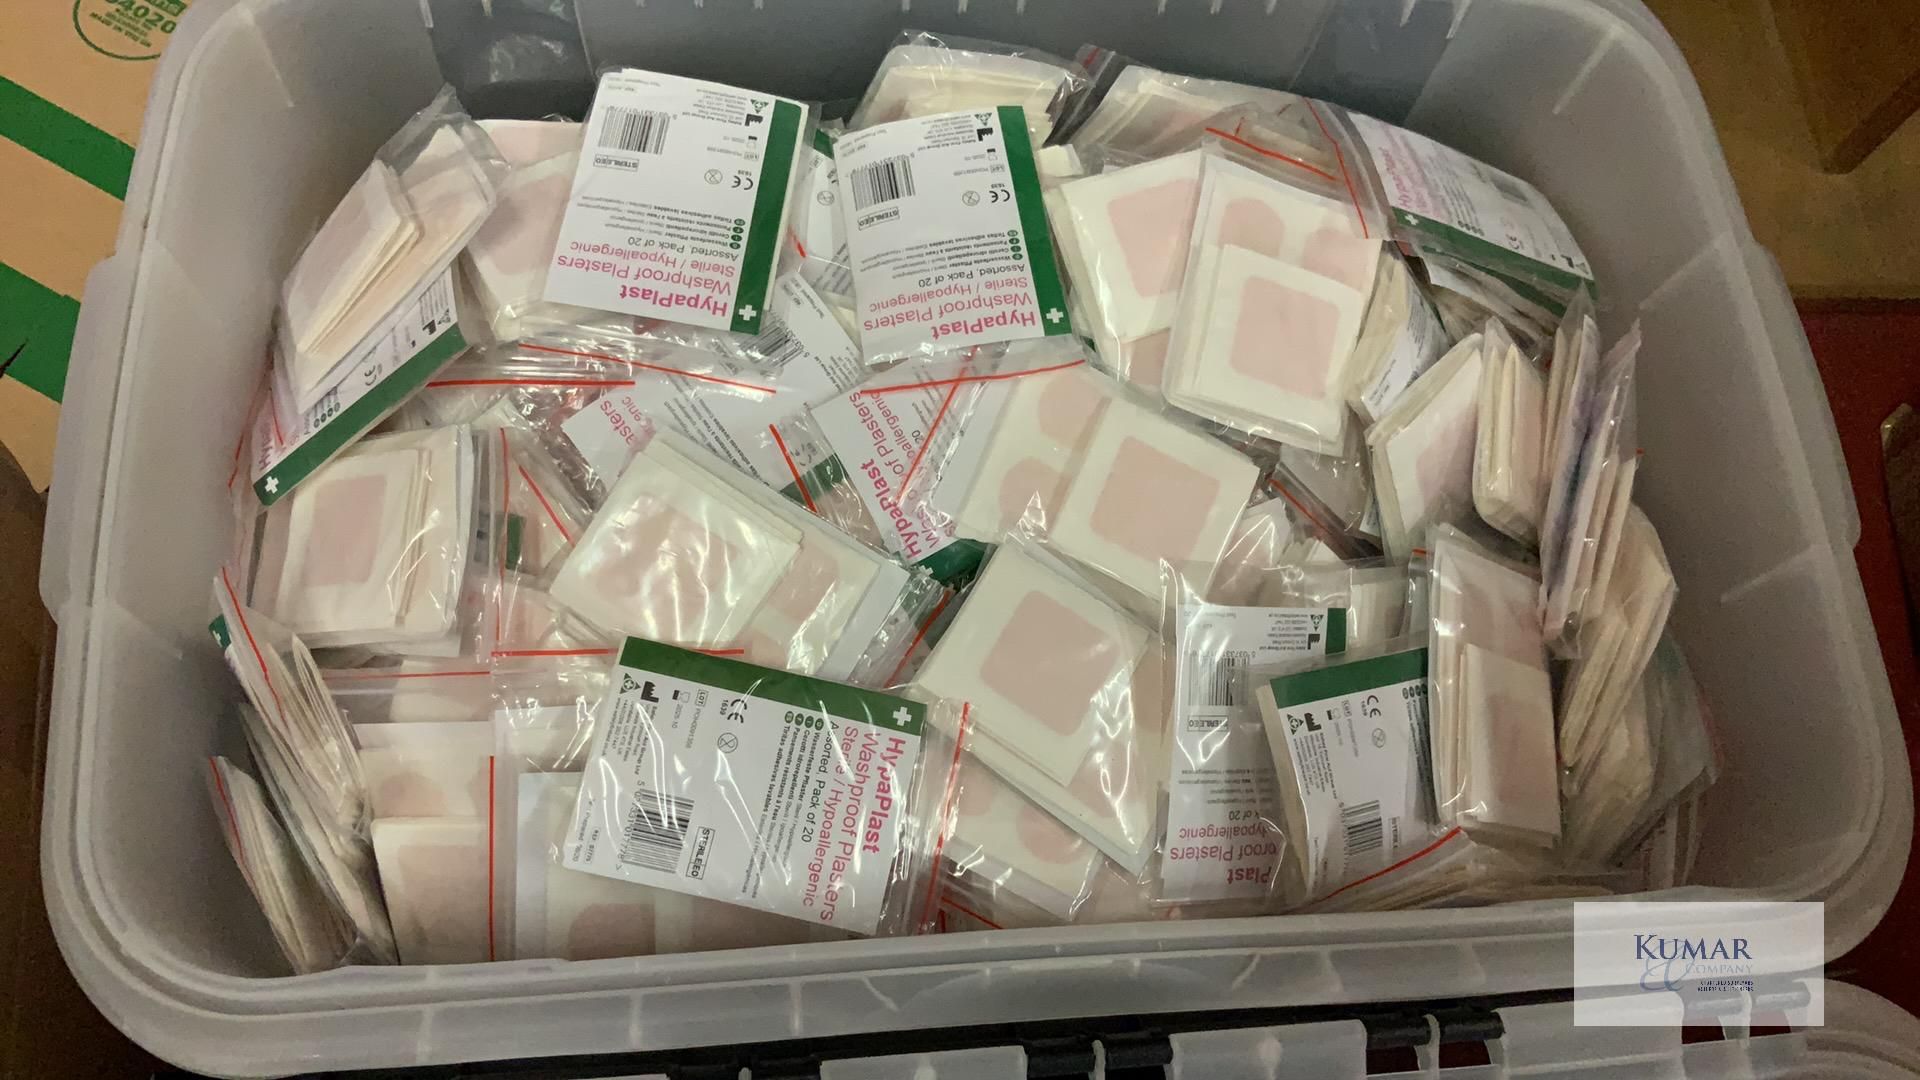 4: Large Boxes of 20 HypaPlast Sterile Washproof Assorted Plasters (10/2025) - Thousands of - Image 6 of 7